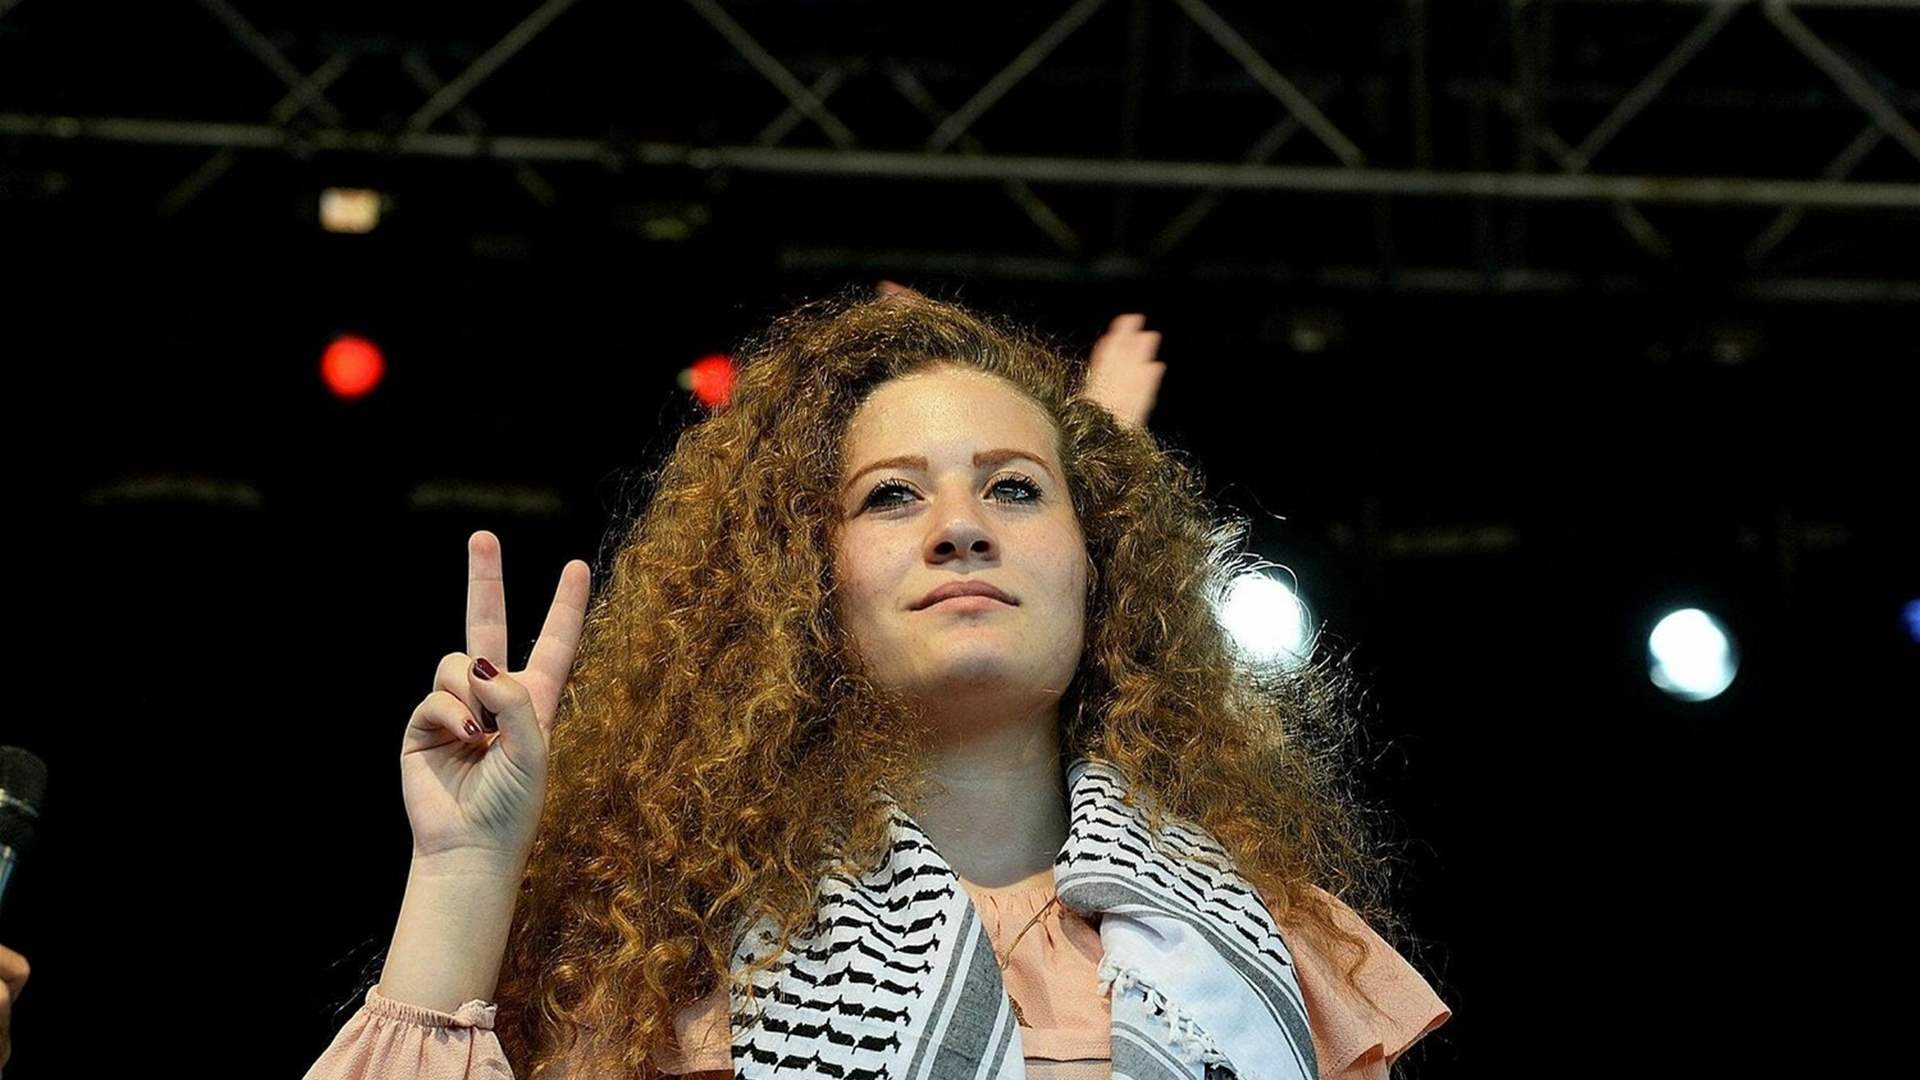 Palestinian icon: Ahed Tamimi re-arrested by Israeli authorities